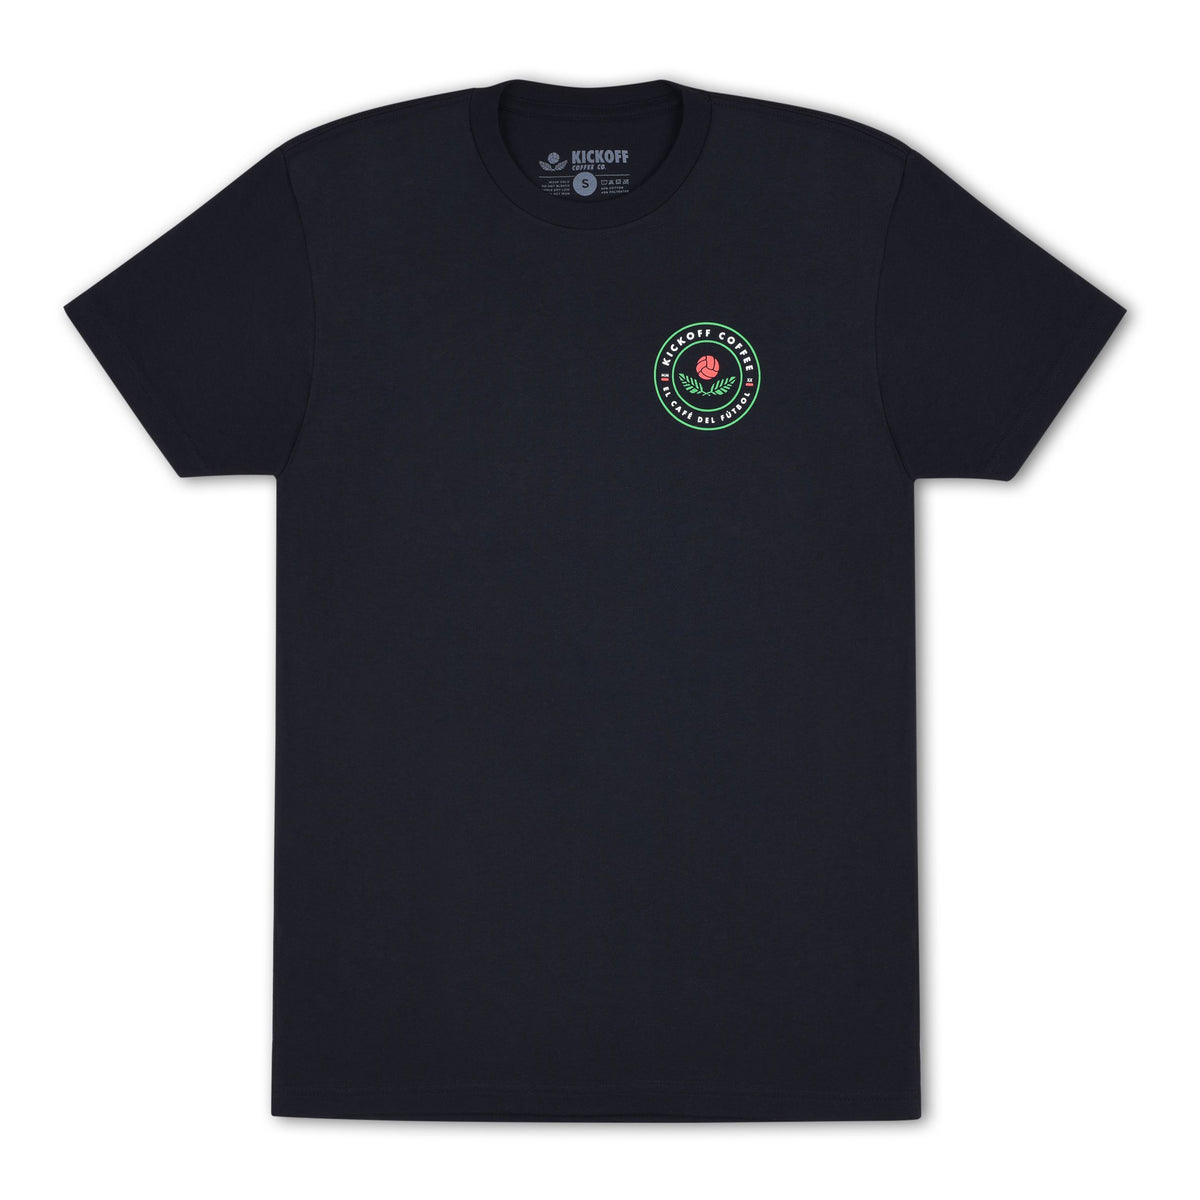 Black t-shirt with circle logo on the front